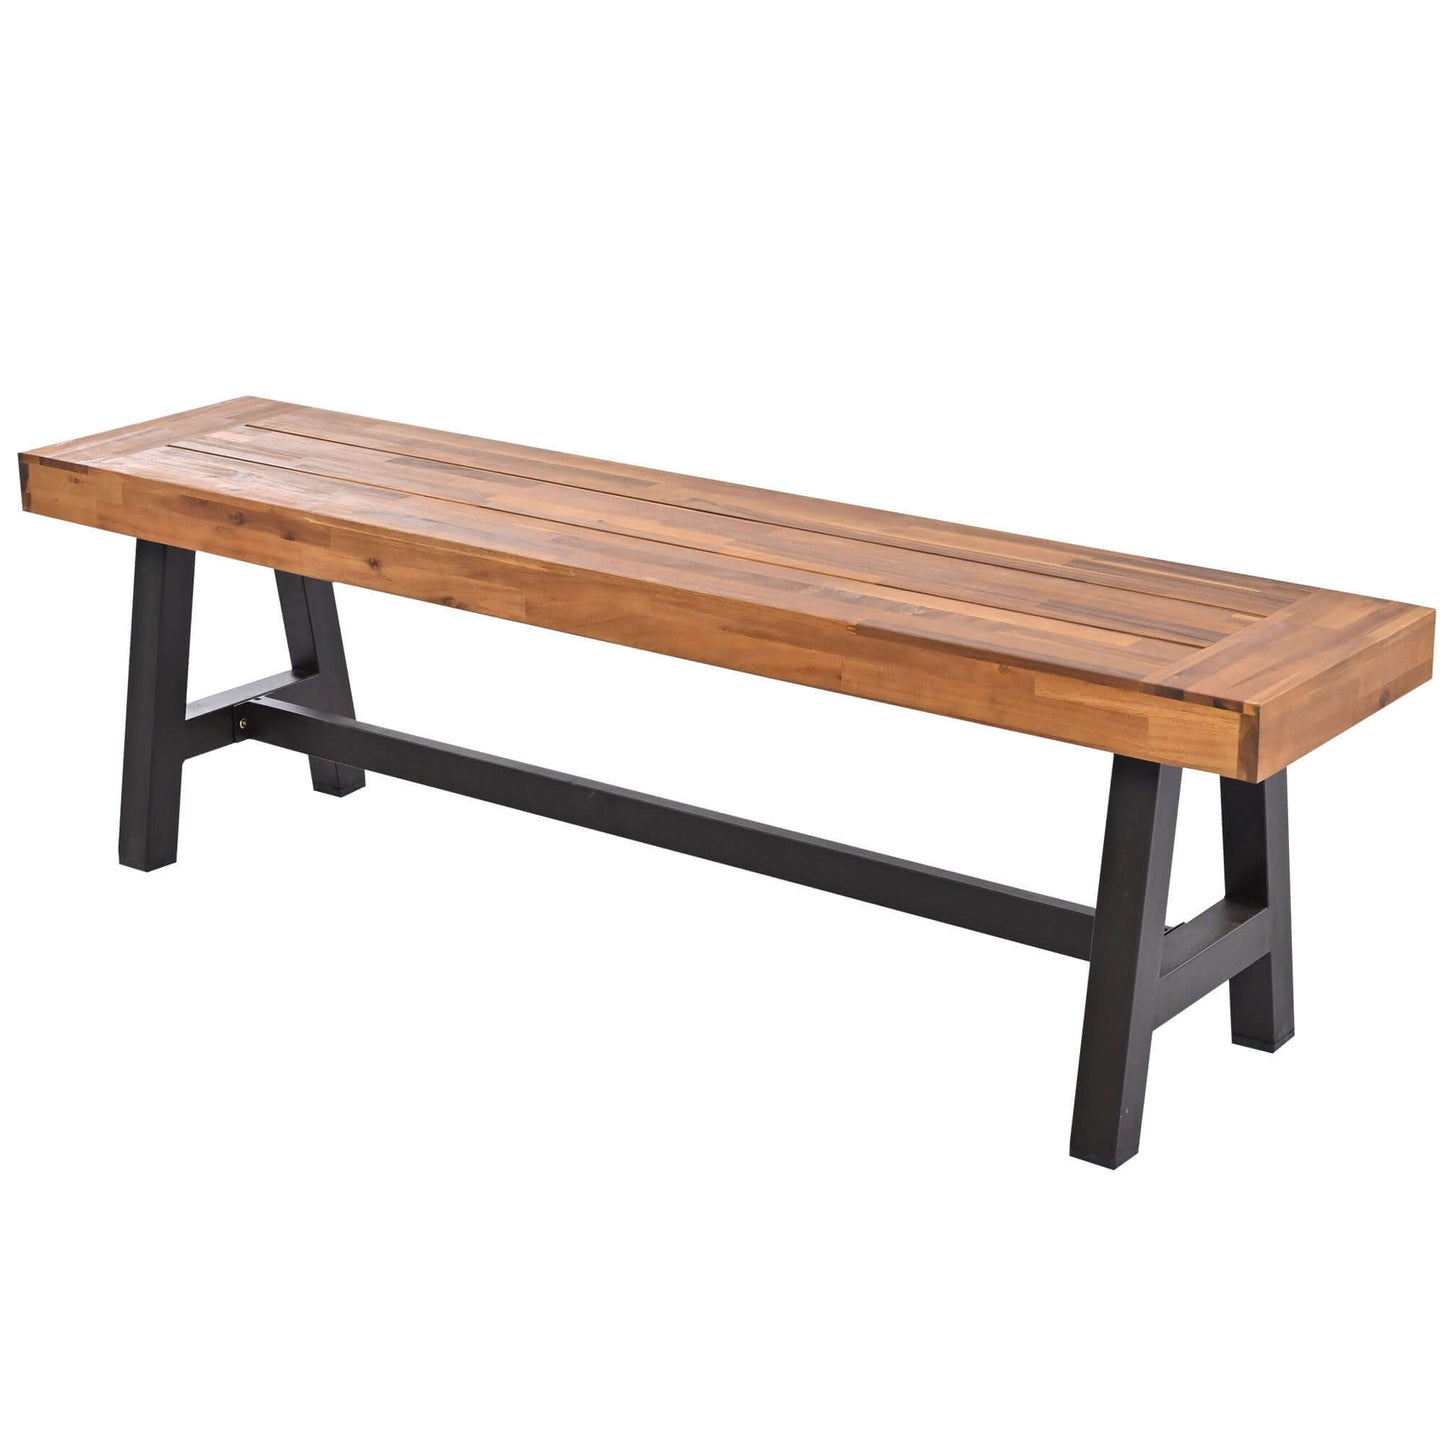 Outdoor acacia wood bench with black metal legs, part of the GO Outdoor Wood Dining Set for 7-8 people.